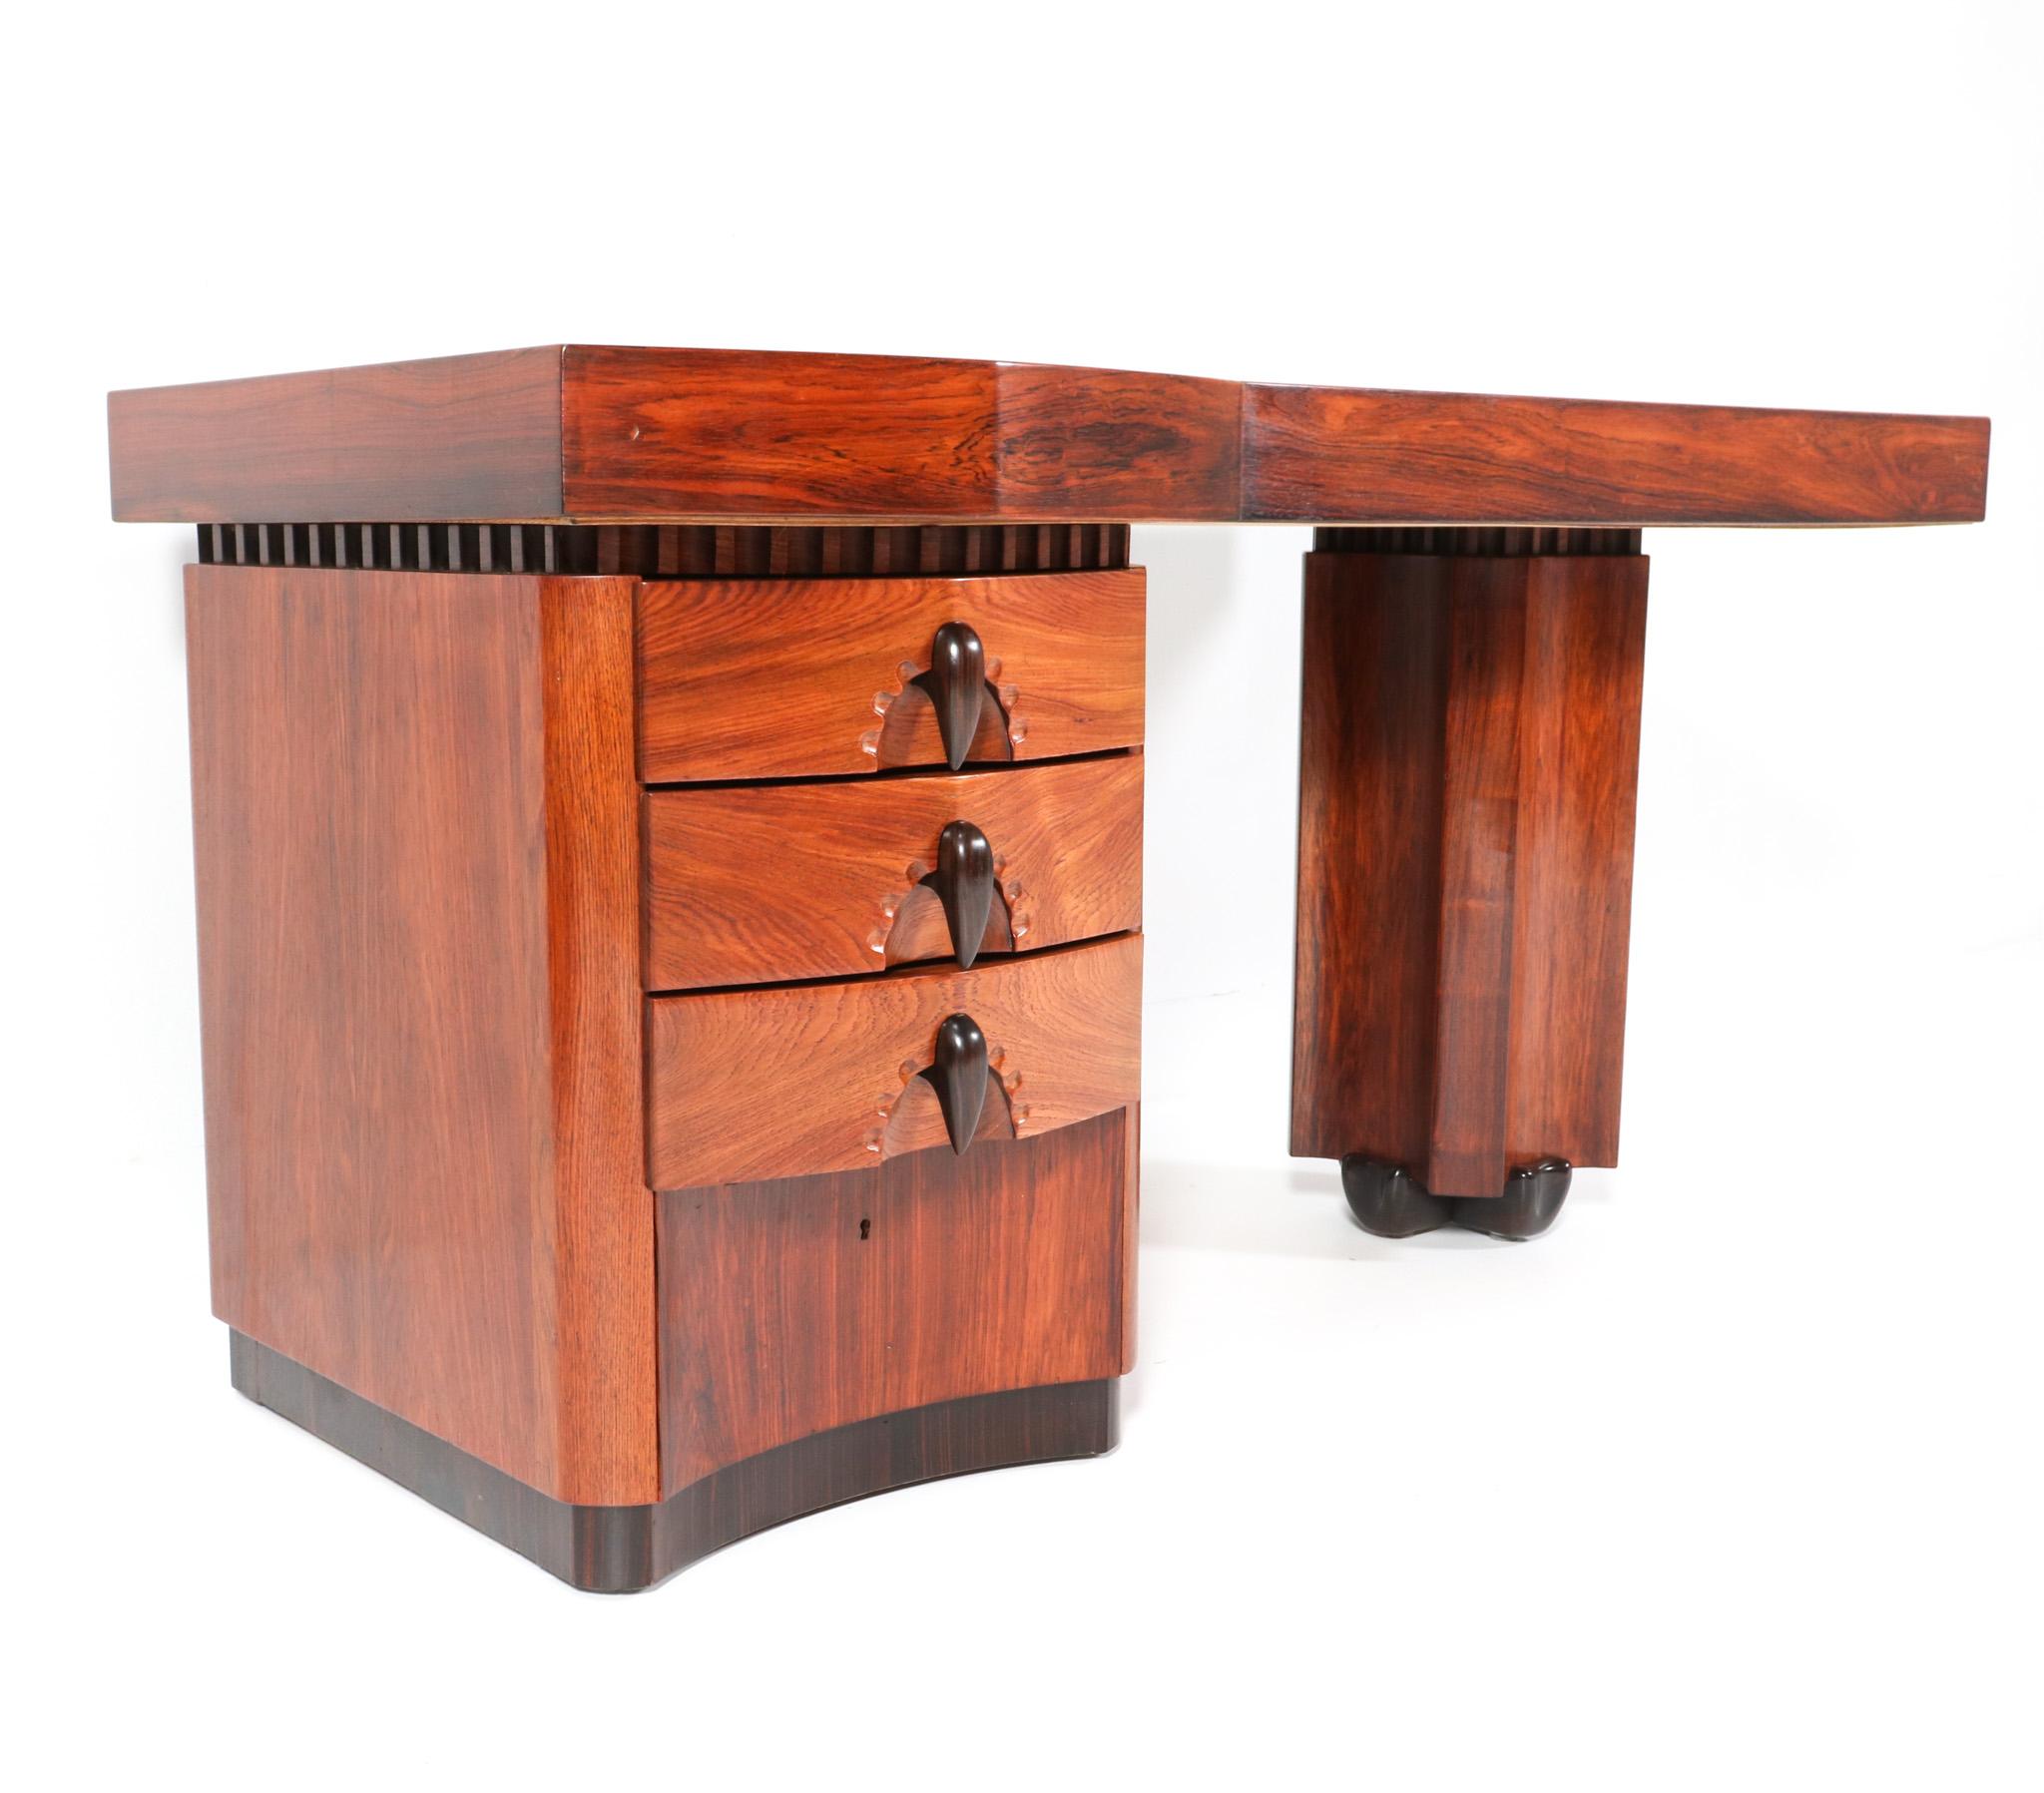 Leather Padouk Art Deco Amsterdamse School Desk or Writing Table by F.A. Warners, 1925